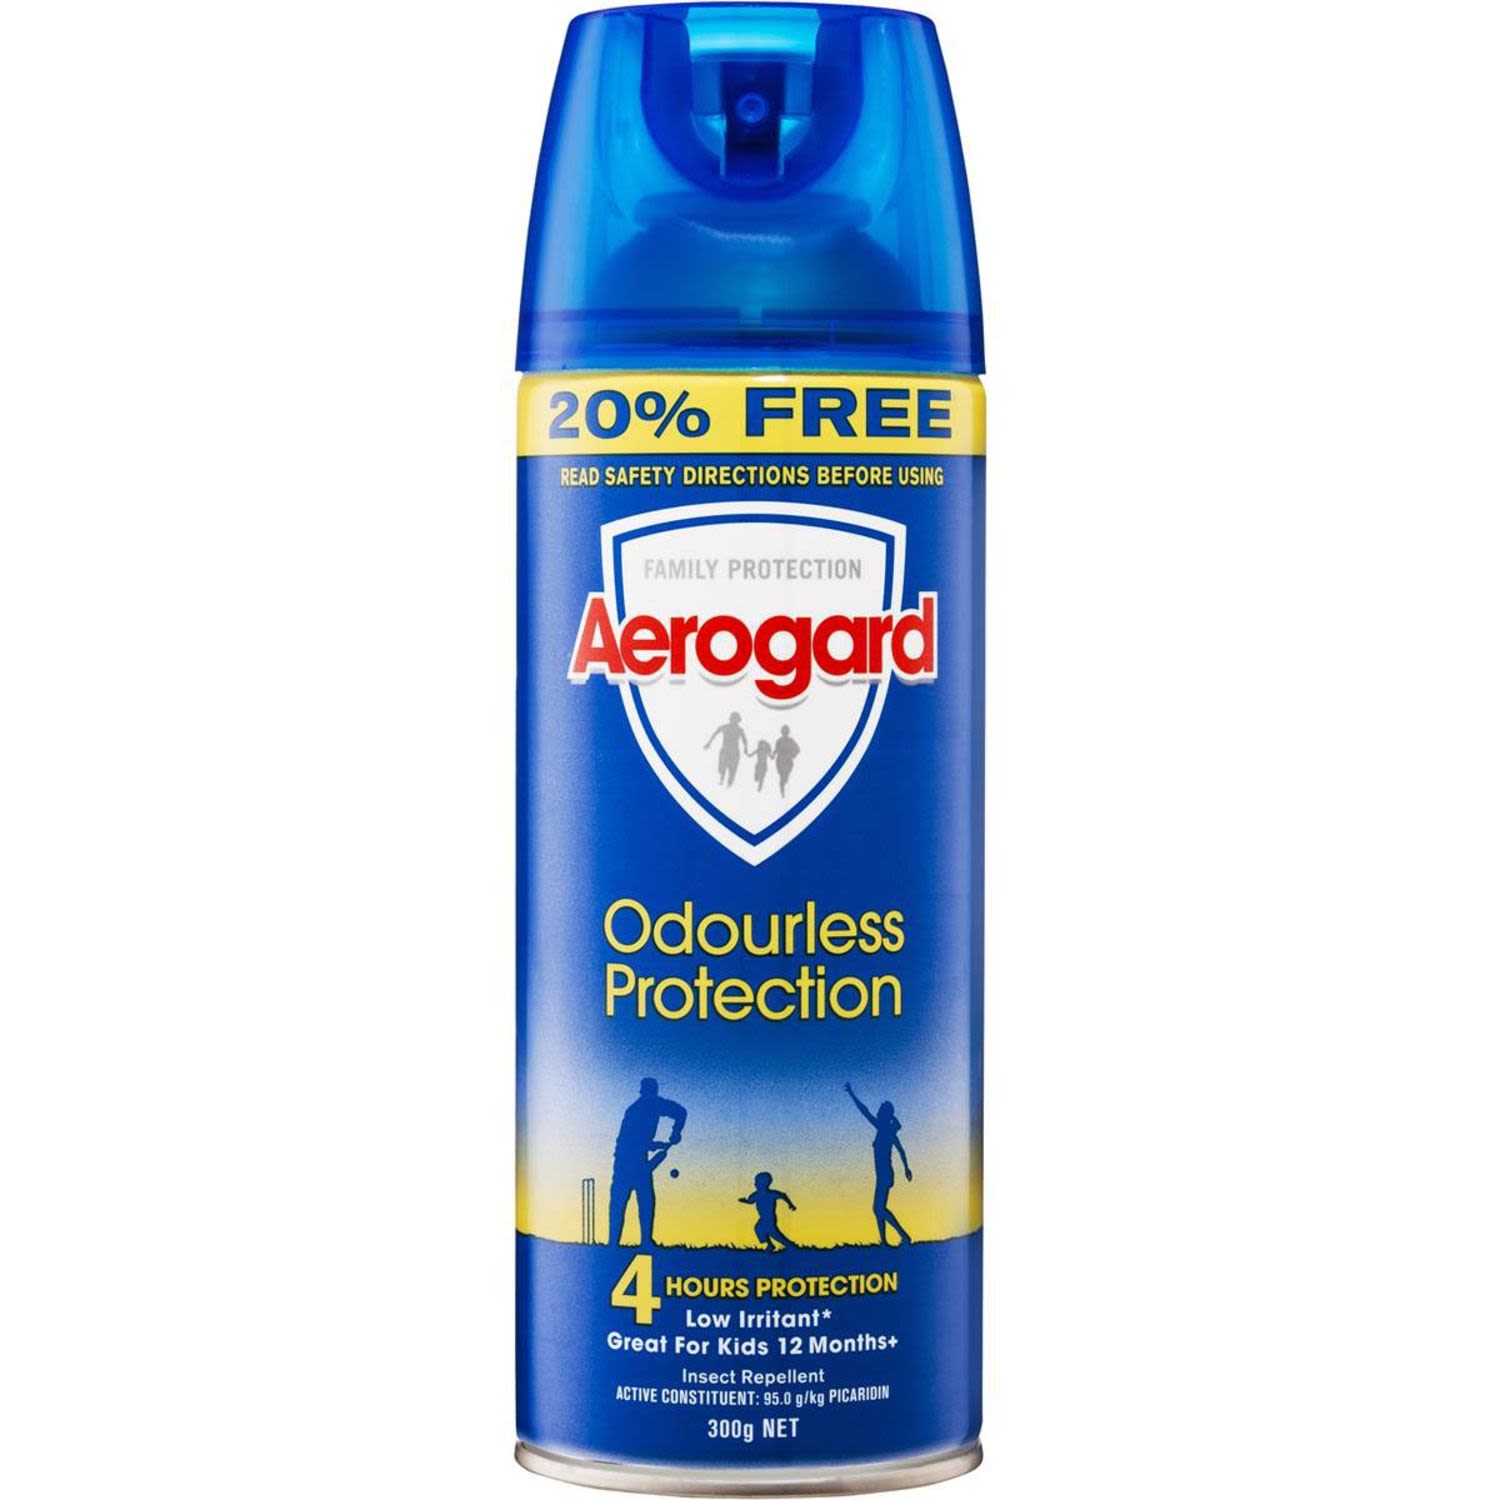 <p>Aerogard Insect Repellent Aerosol Spray providing odourless protection against mosquitoes and other insects.</p><p>- Repels mosquitoes, flies, sandflies and other annoying and biting insects for up to 4 hours.<br />- Protects you and your family against disease-carrying insects.<br />- Odourless.<br />- Low irritant on skin.<br />- Non-greasy formula.<br />- Suitable for children 12 months & over.<br />- Additional repellency can be gained by lightly spraying clothing.</p><br /> <br /> <br /><br />Country of Origin: Made in Australia from imported and local ingredients